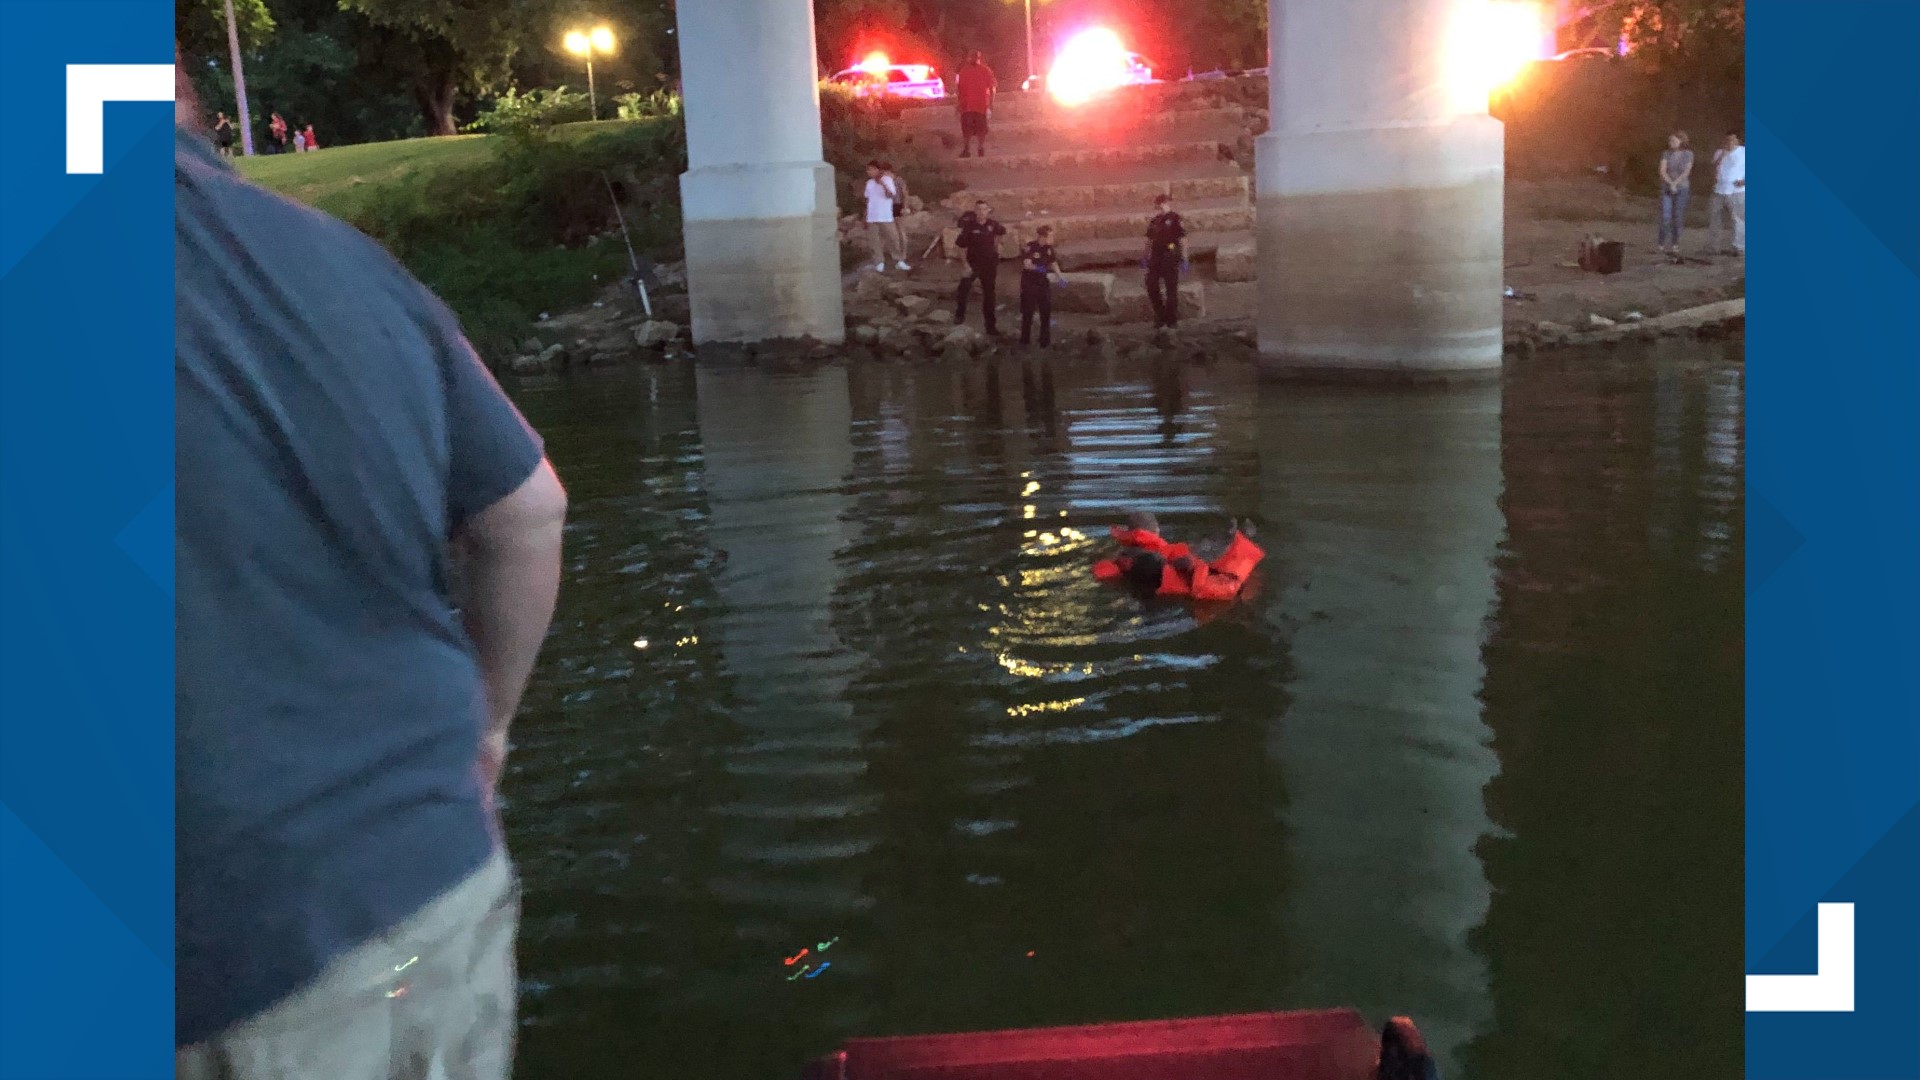 During a dinner cruise Monday night, two Waco River Safari employees sprang into action to save a woman they saw in the water.